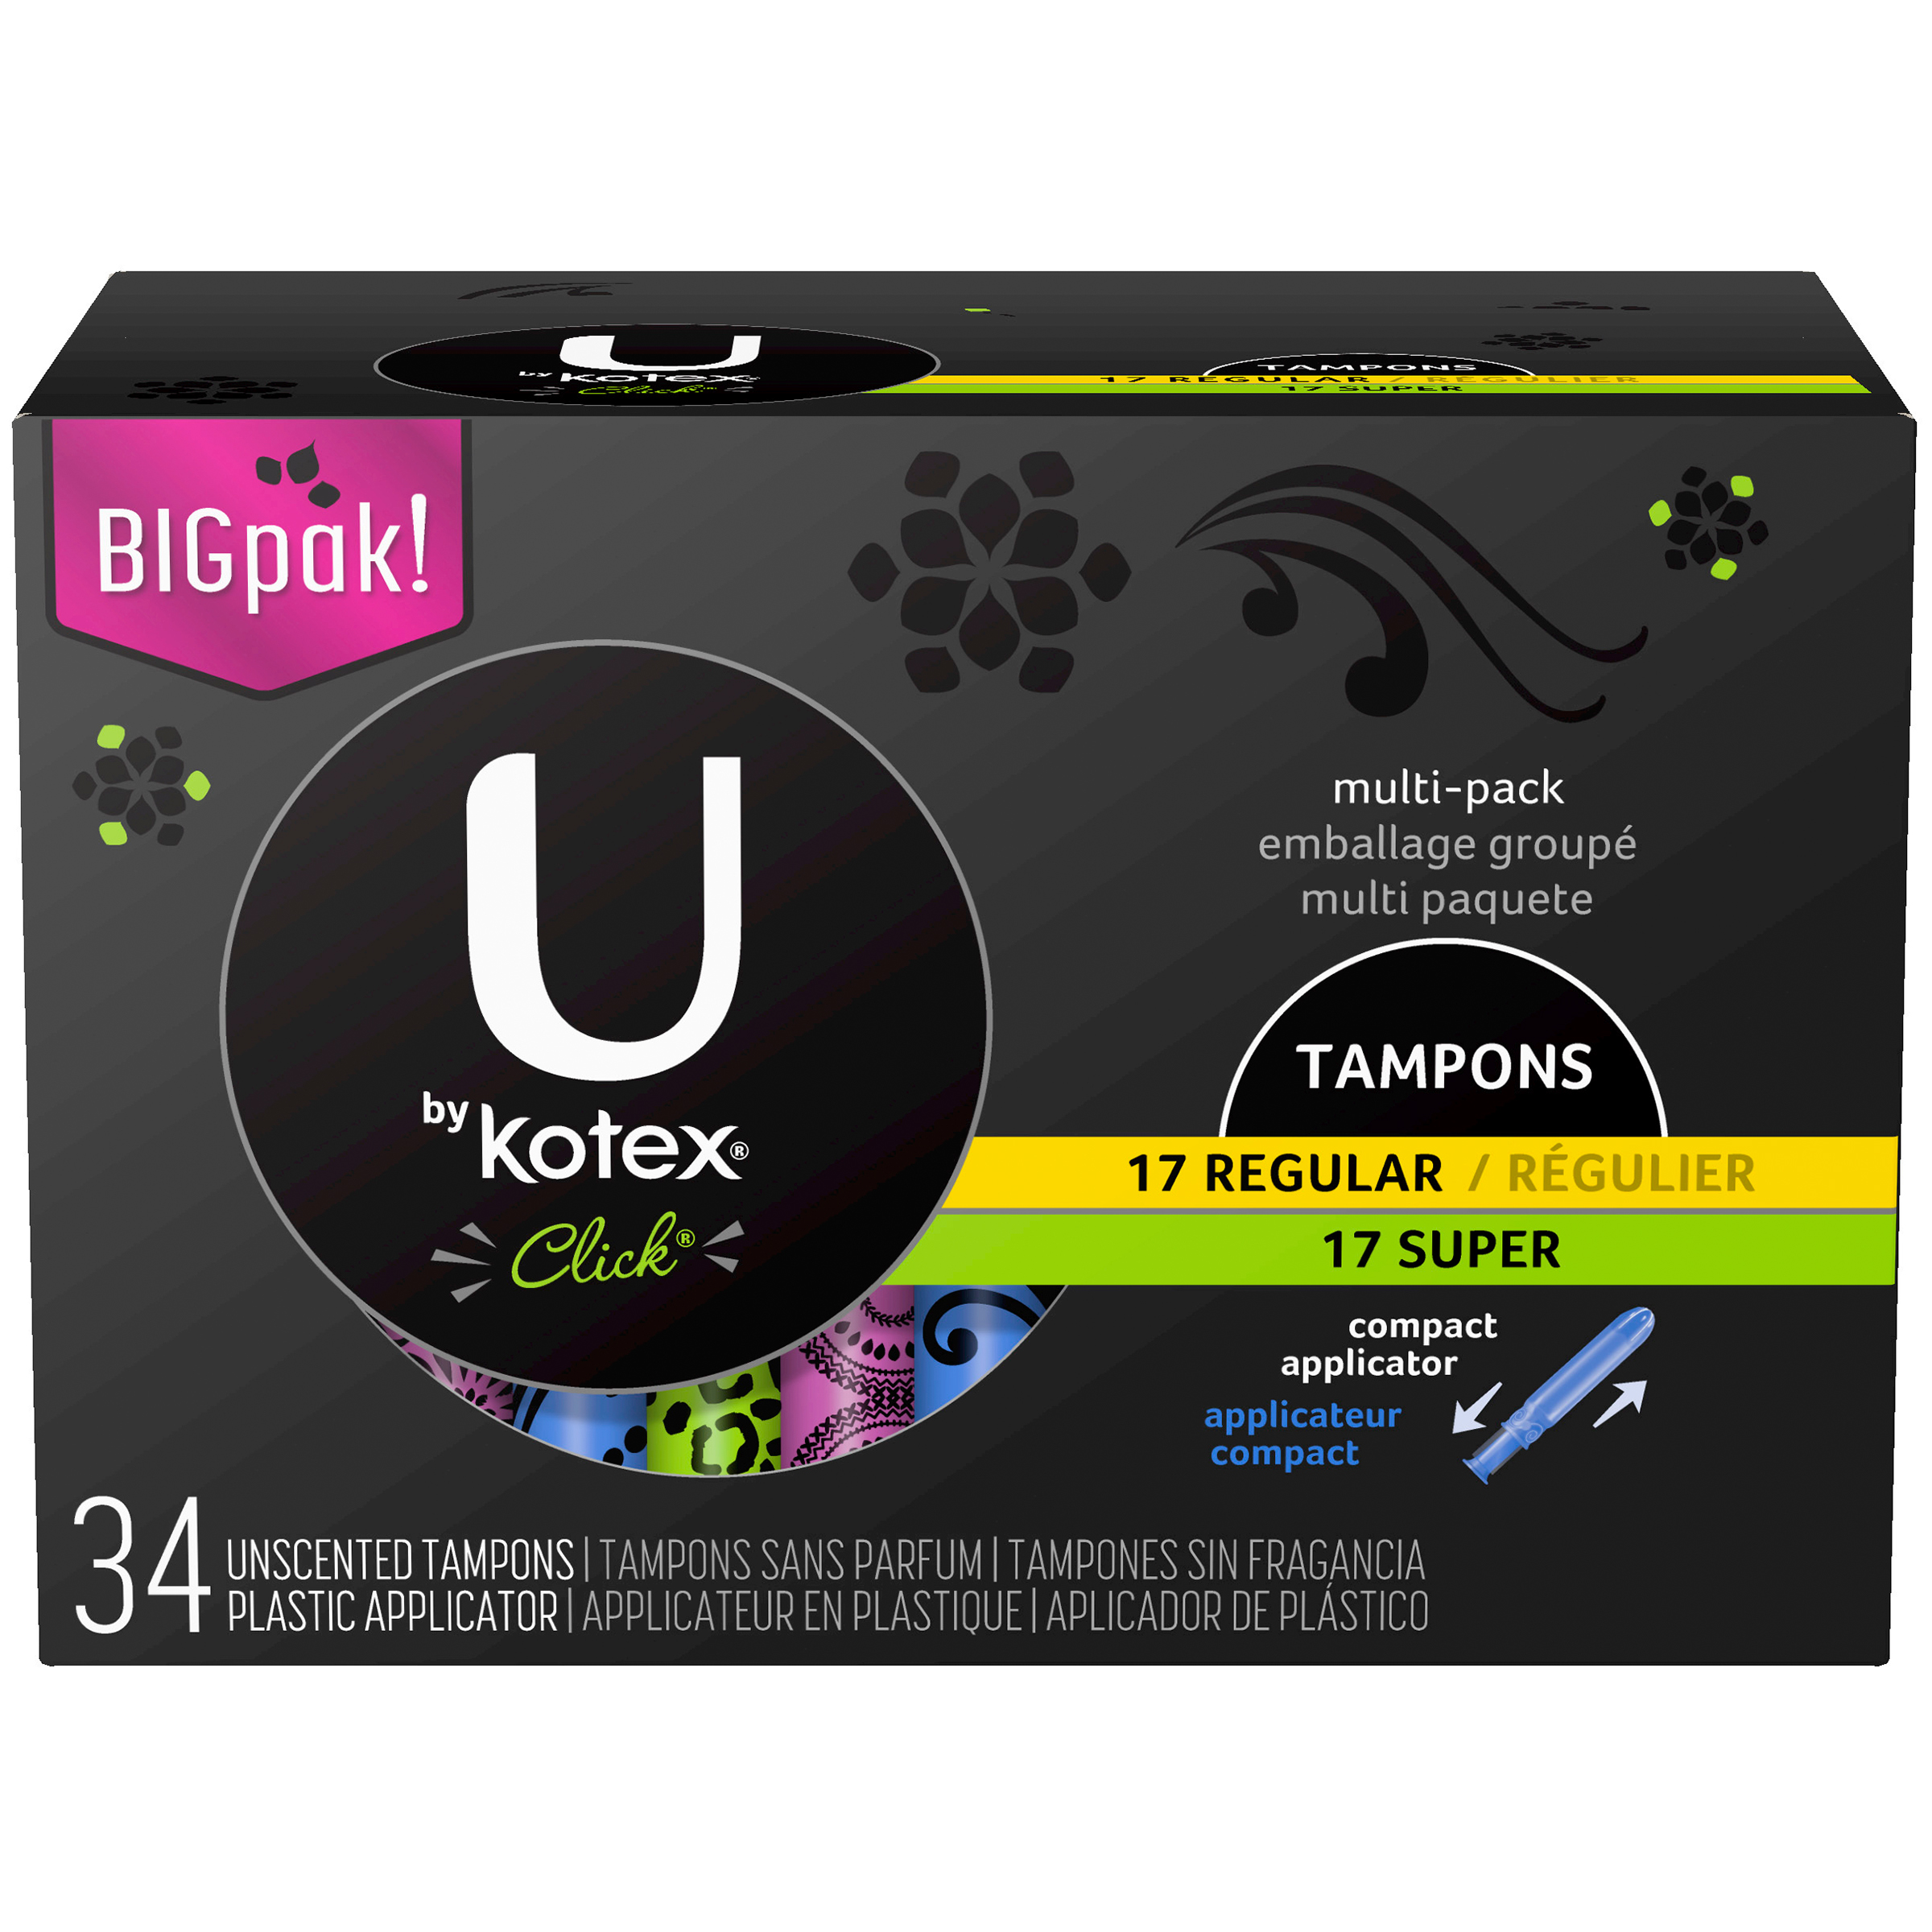 UPC 036000426632 product image for Kotex Tampons 34 CT BOX - KIMBERLY-CLARK/HOUSEHOLD PRODUCTS DIV. | upcitemdb.com